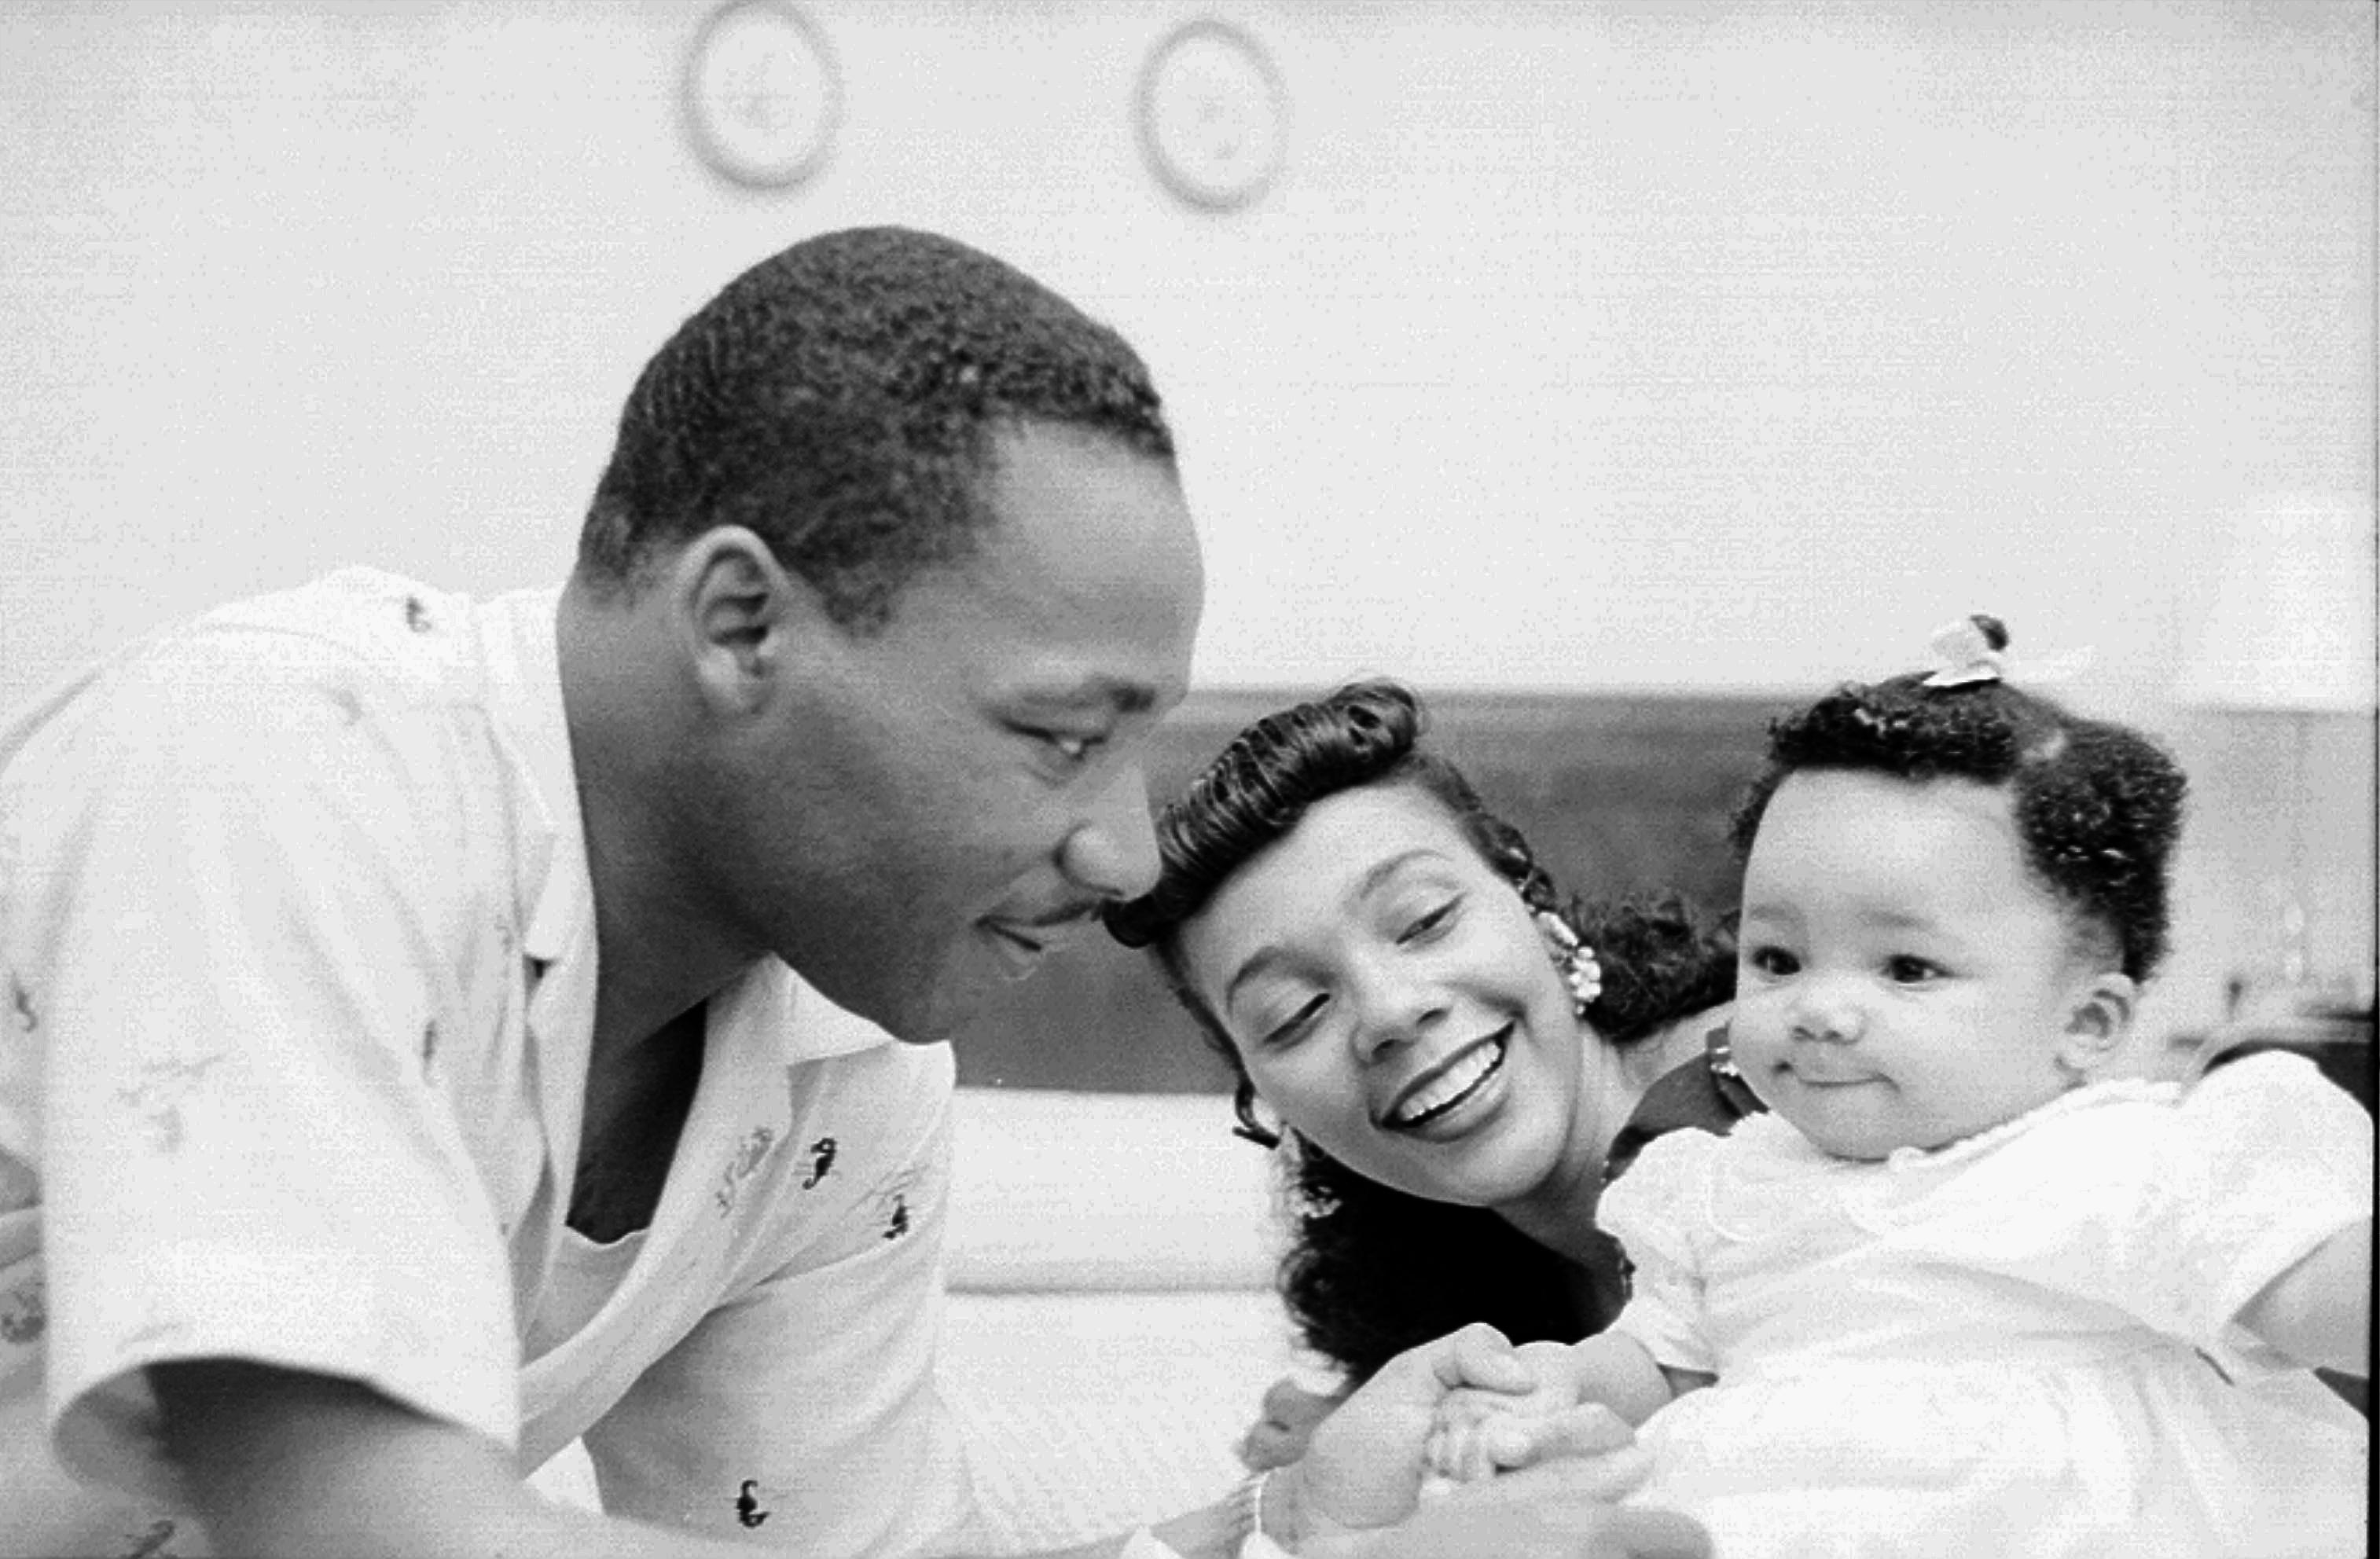 Martin Luther King, Jr. relaxes at home with his family in May 1956